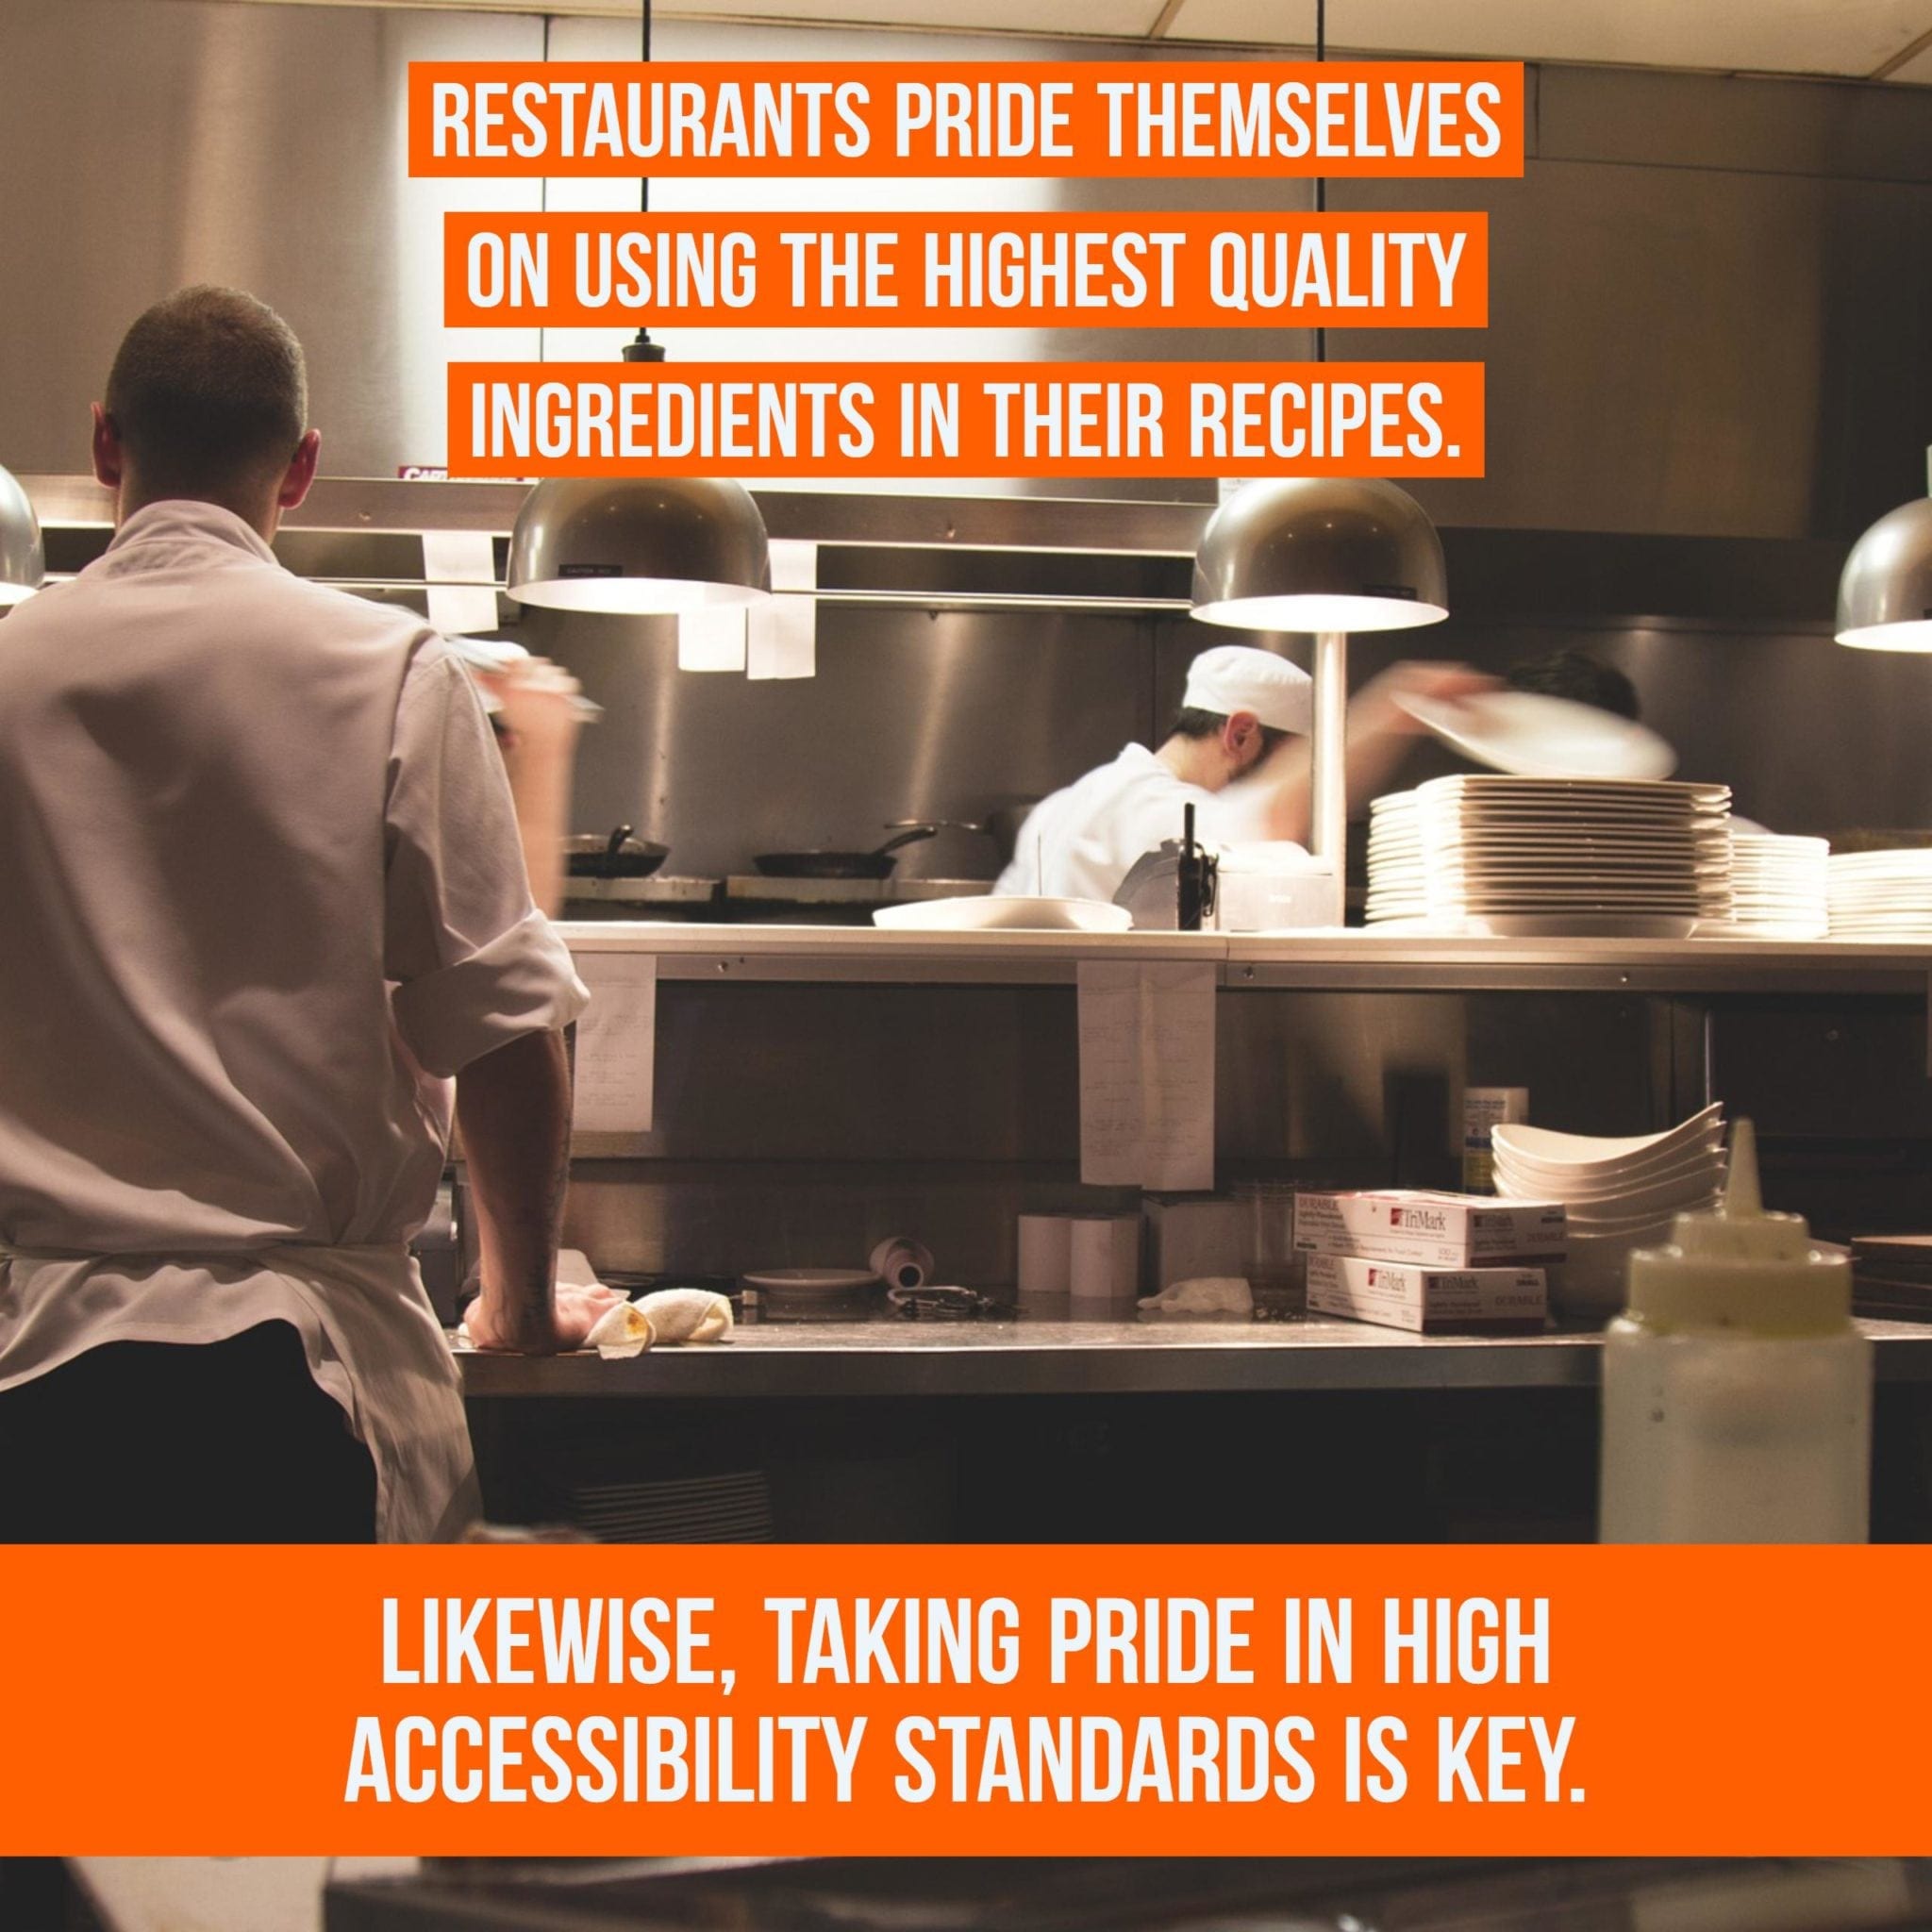 Two chefs in a kitchen with a text overlay reading "restaurants pride themselves on using the highest quality ingredients in their recipes. Likewise, taking pride in high accessibility standards is key."